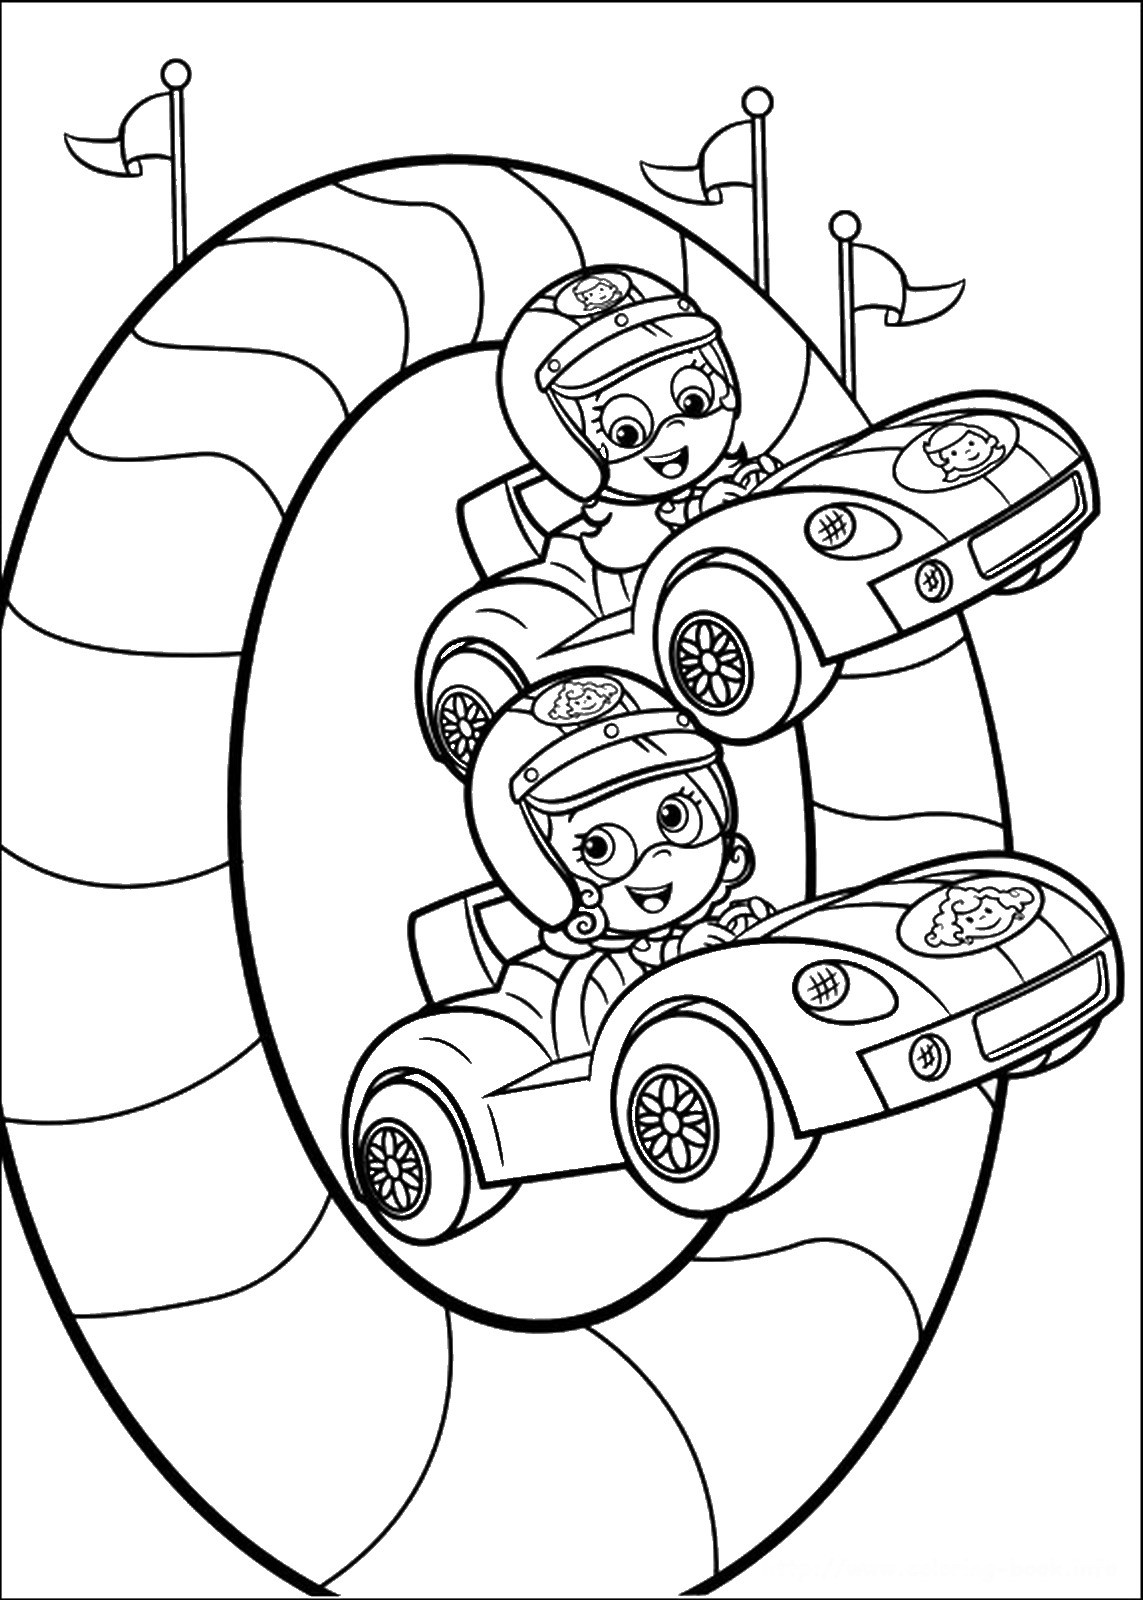 Printing A Coloring Book
 Bubble Guppies Coloring Pages Best Coloring Pages For Kids